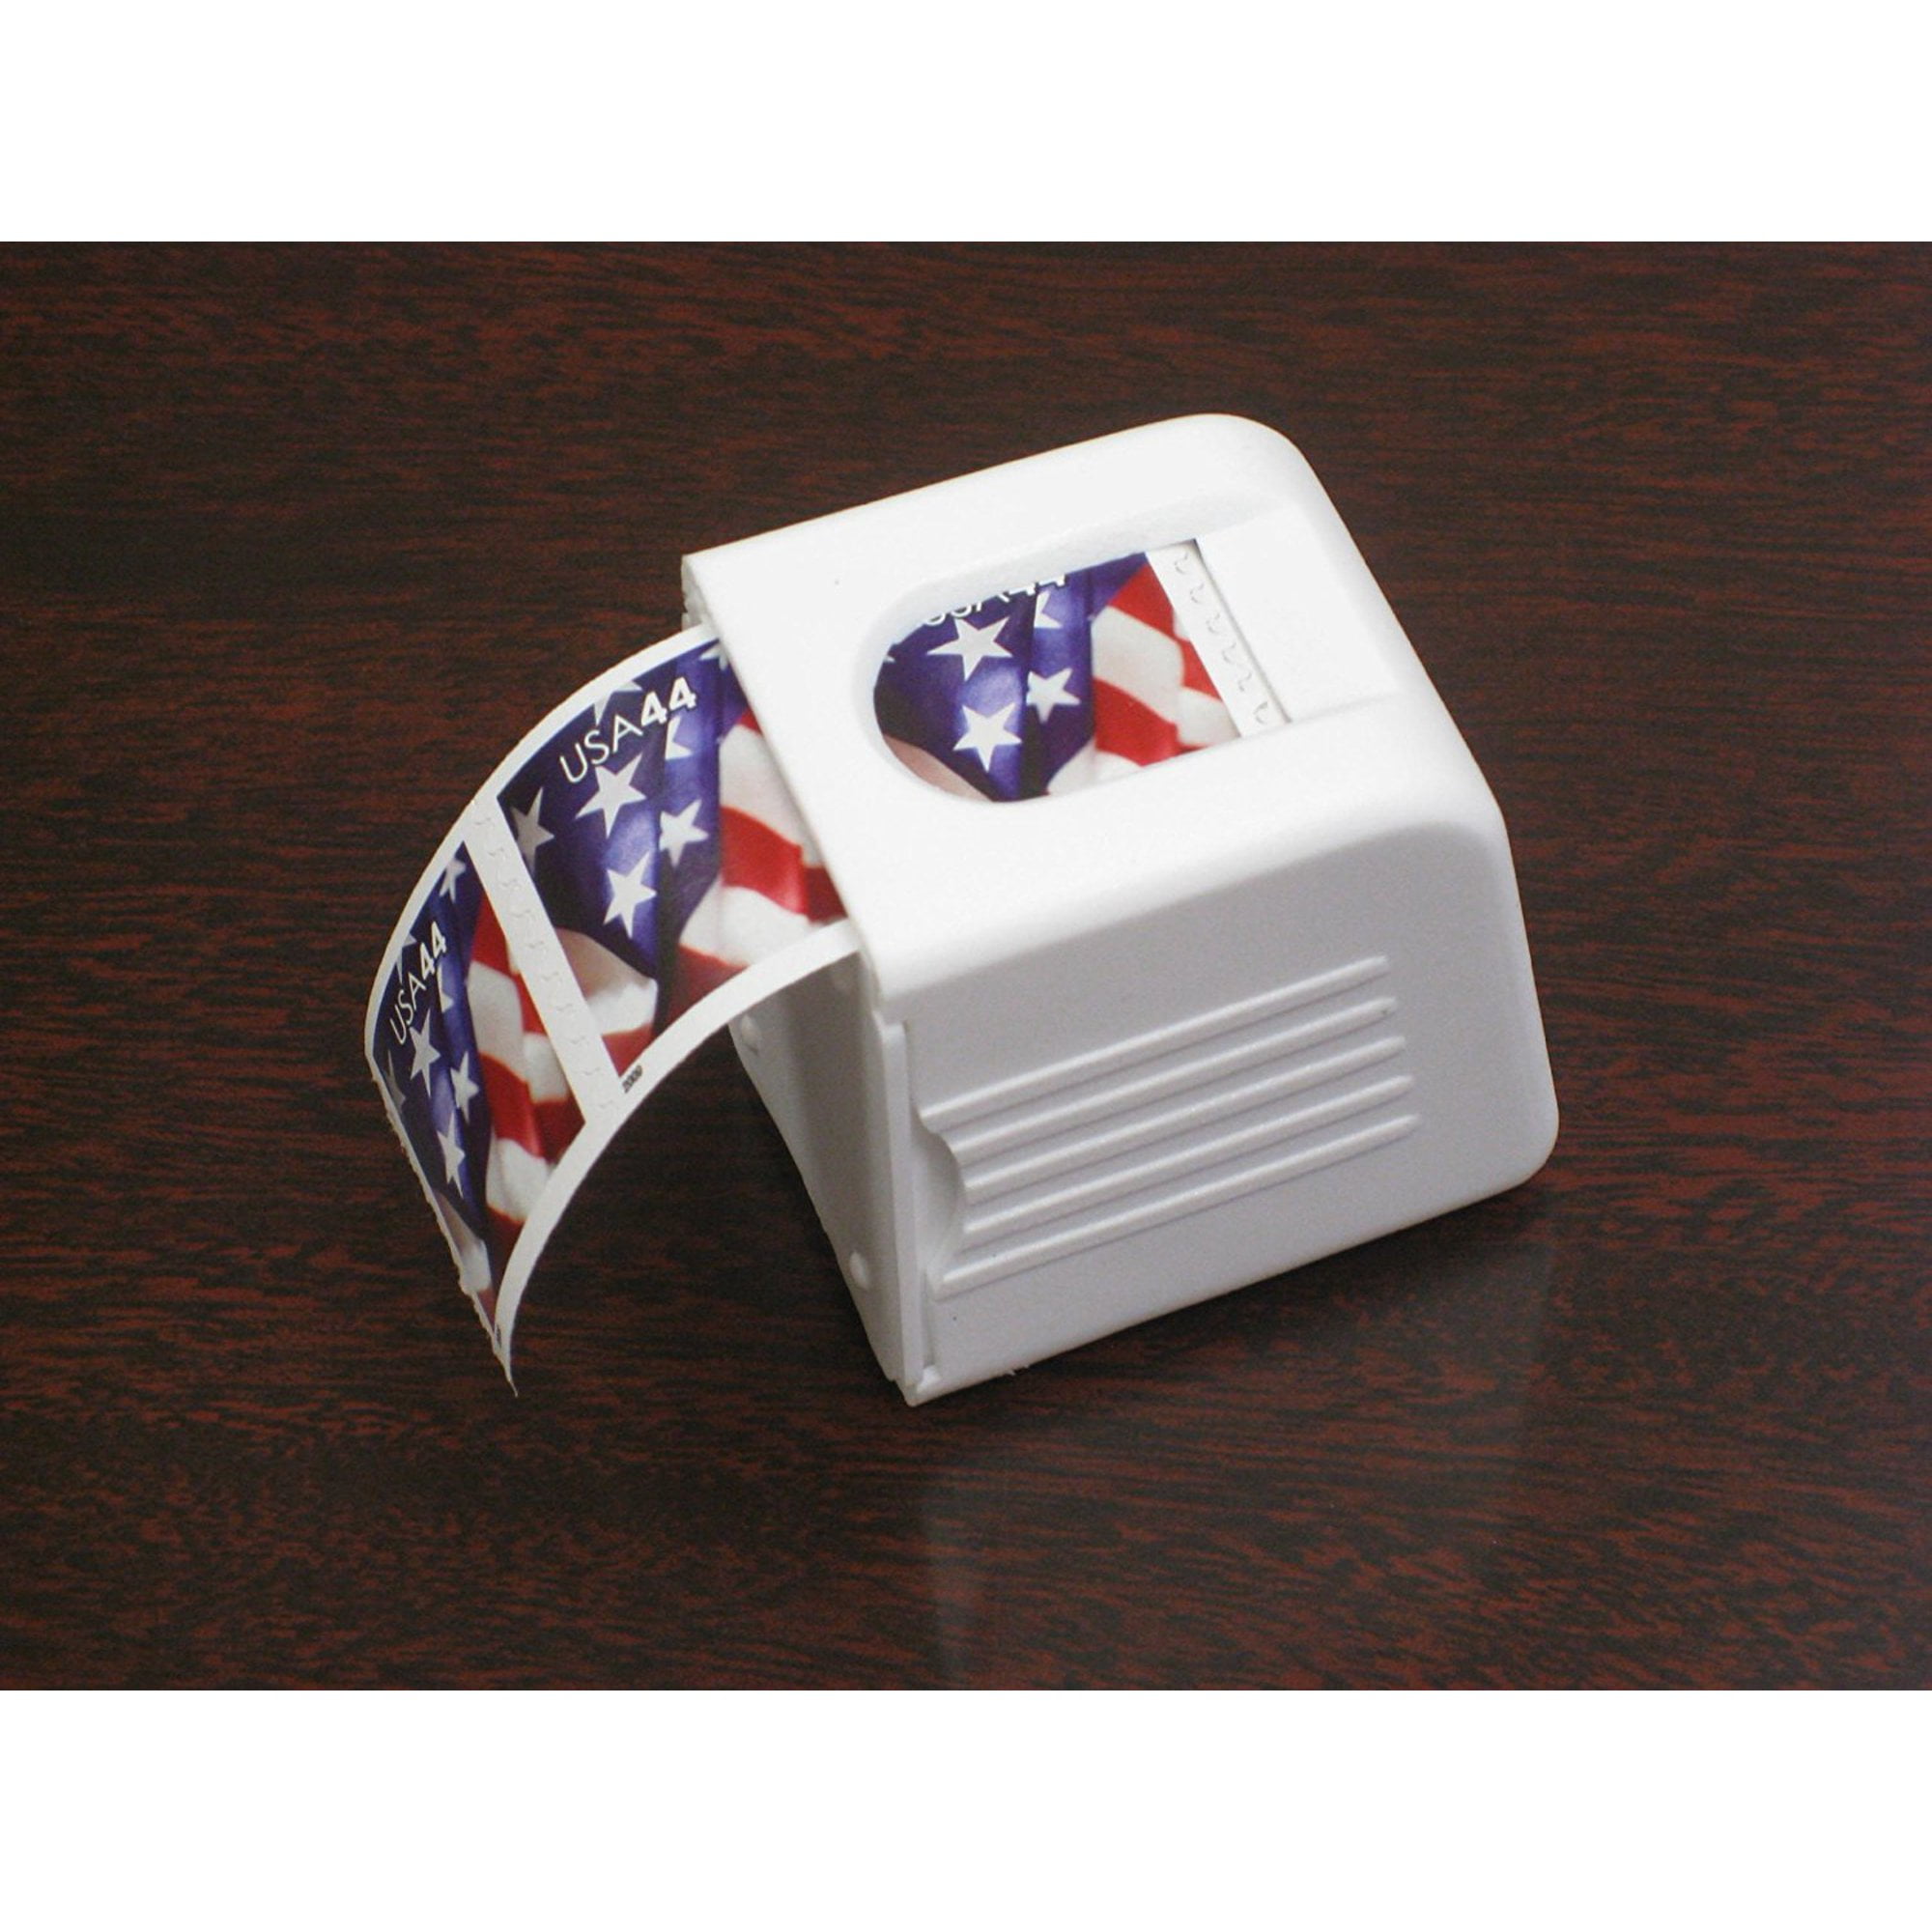 Wholesale Compact And Impact Resistant Postage Stamp Dispenser For 100  Stamp Identifier Ideal For Desk Or Otkjr Use From Stamp2022, $2.74